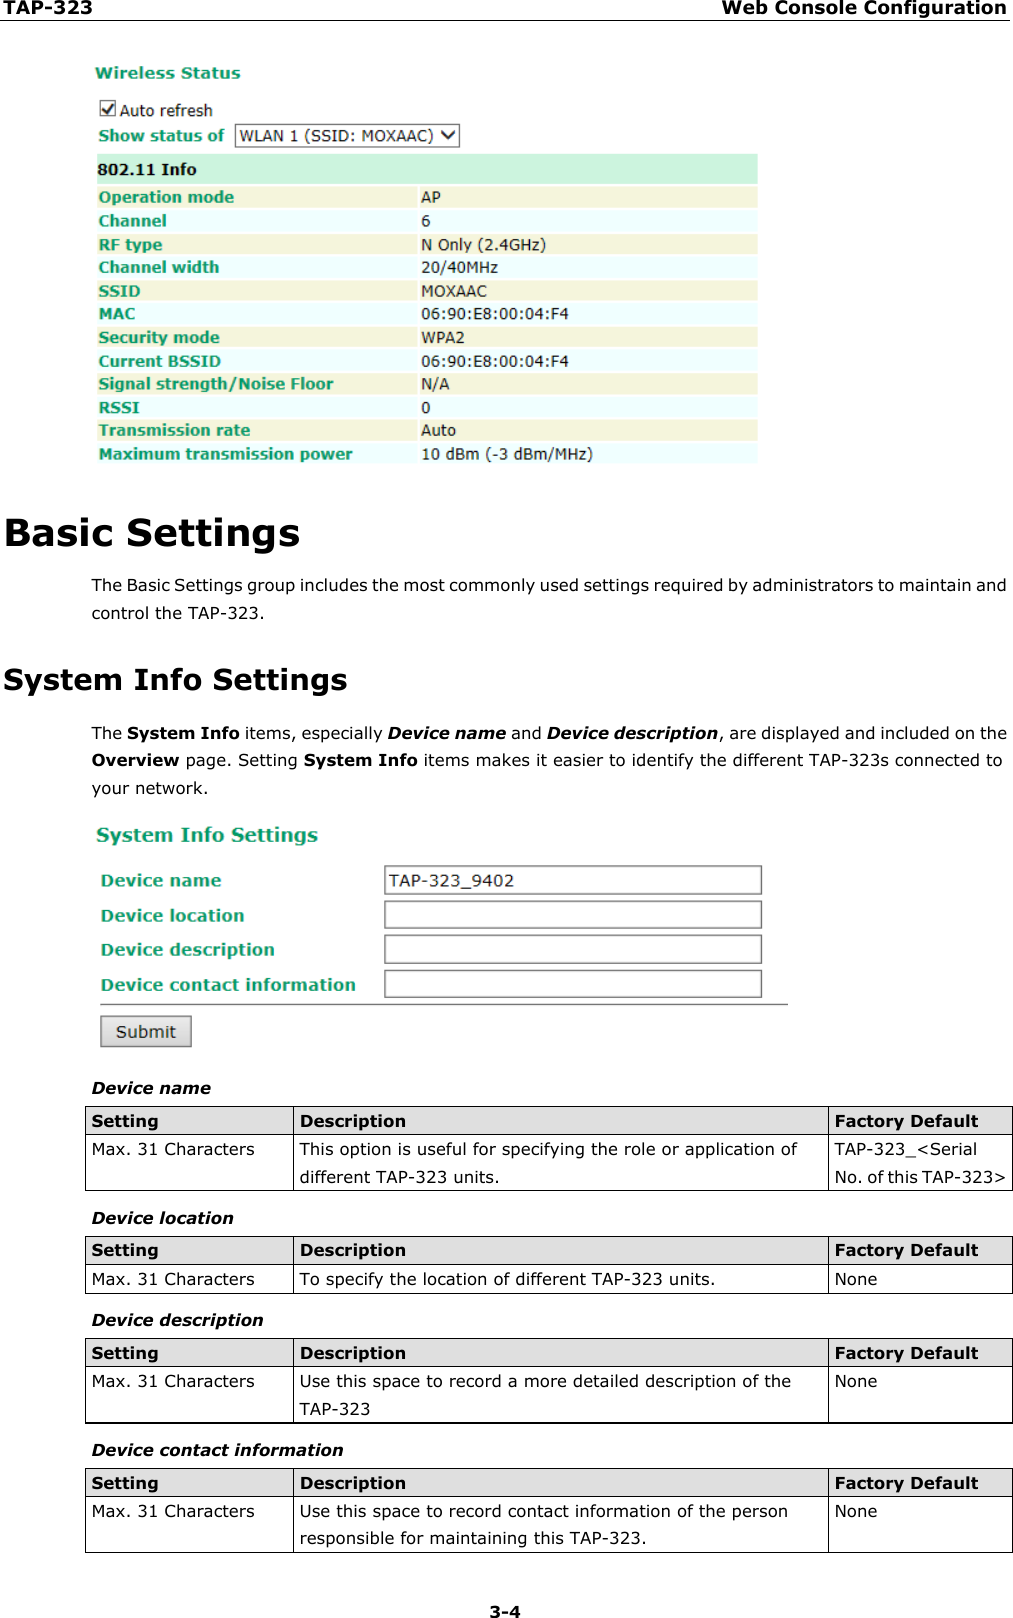 TAP-323 Web Console Configuration  3-4  Basic Settings The Basic Settings group includes the most commonly used settings required by administrators to maintain and control the TAP-323. System Info Settings The System Info items, especially Device name and Device description, are displayed and included on the Overview page. Setting System Info items makes it easier to identify the different TAP-323s connected to your network.  Device name Setting Description Factory Default Max. 31 Characters This option is useful for specifying the role or application of different TAP-323 units. TAP-323_&lt;Serial No. of this TAP-323&gt; Device location Setting Description Factory Default Max. 31 Characters To specify the location of different TAP-323 units. None Device description Setting Description Factory Default Max. 31 Characters Use this space to record a more detailed description of the TAP-323 None Device contact information Setting Description Factory Default Max. 31 Characters Use this space to record contact information of the person responsible for maintaining this TAP-323. None 